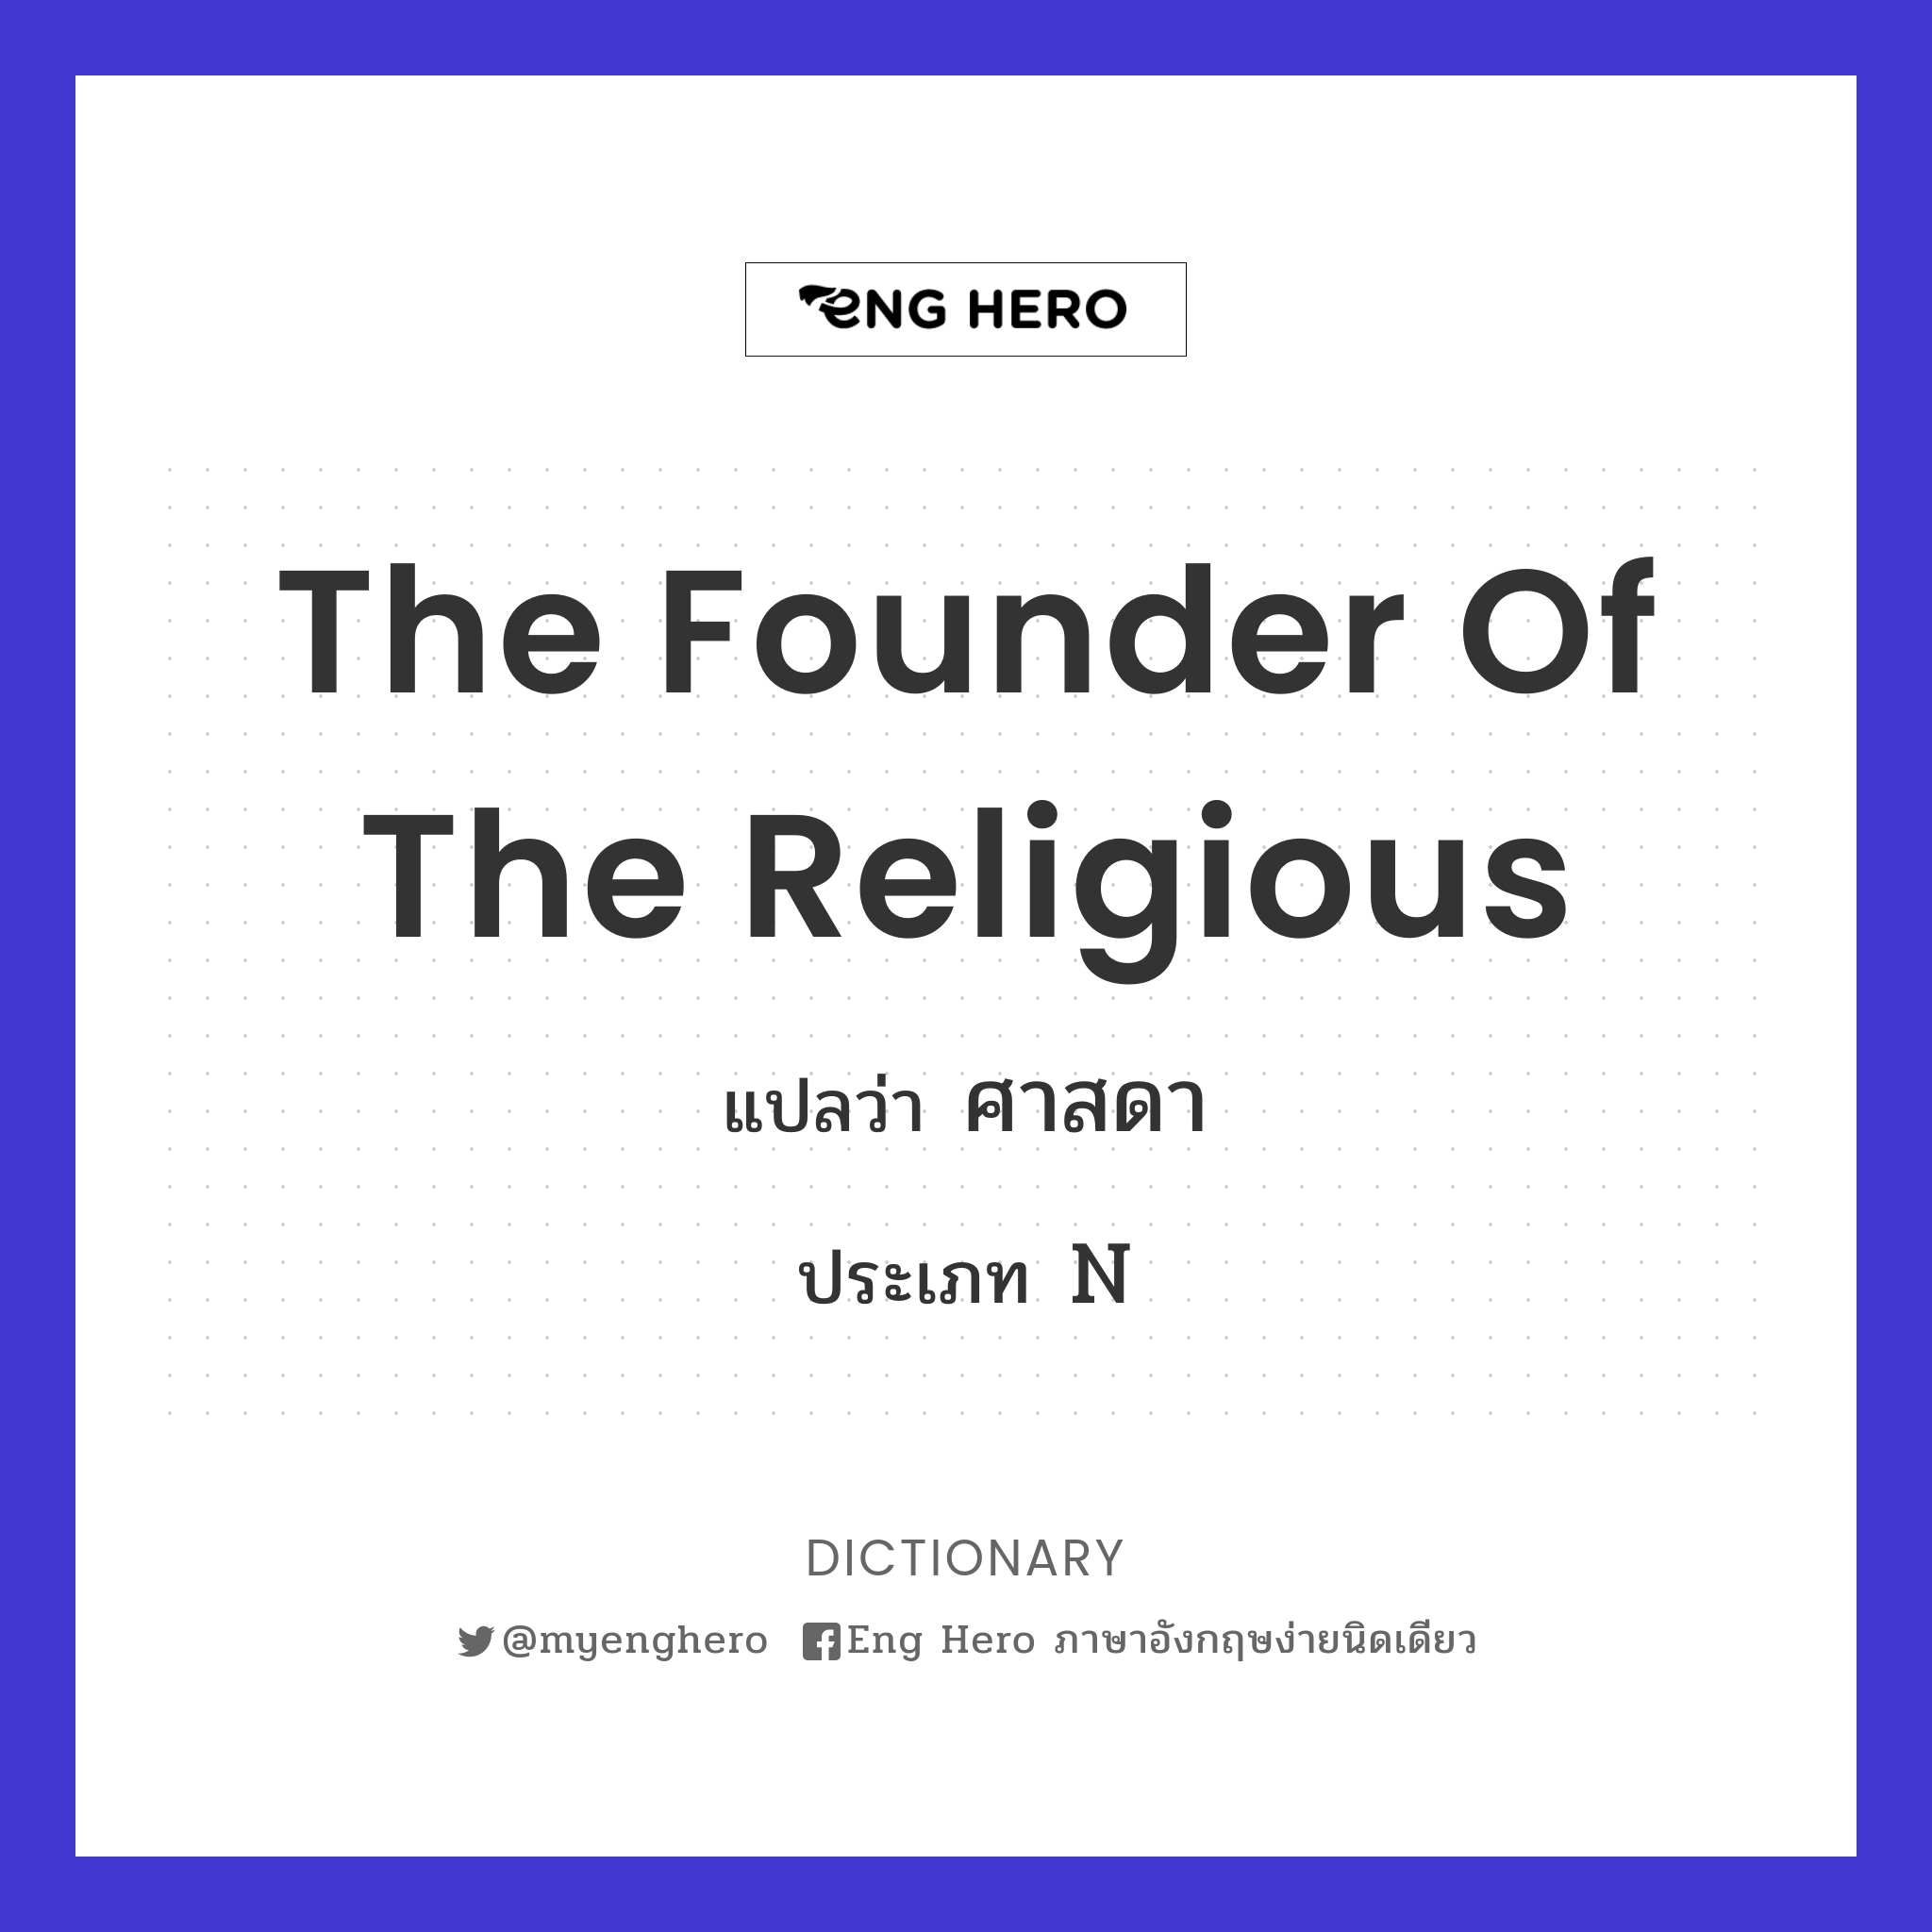 The founder of the religious